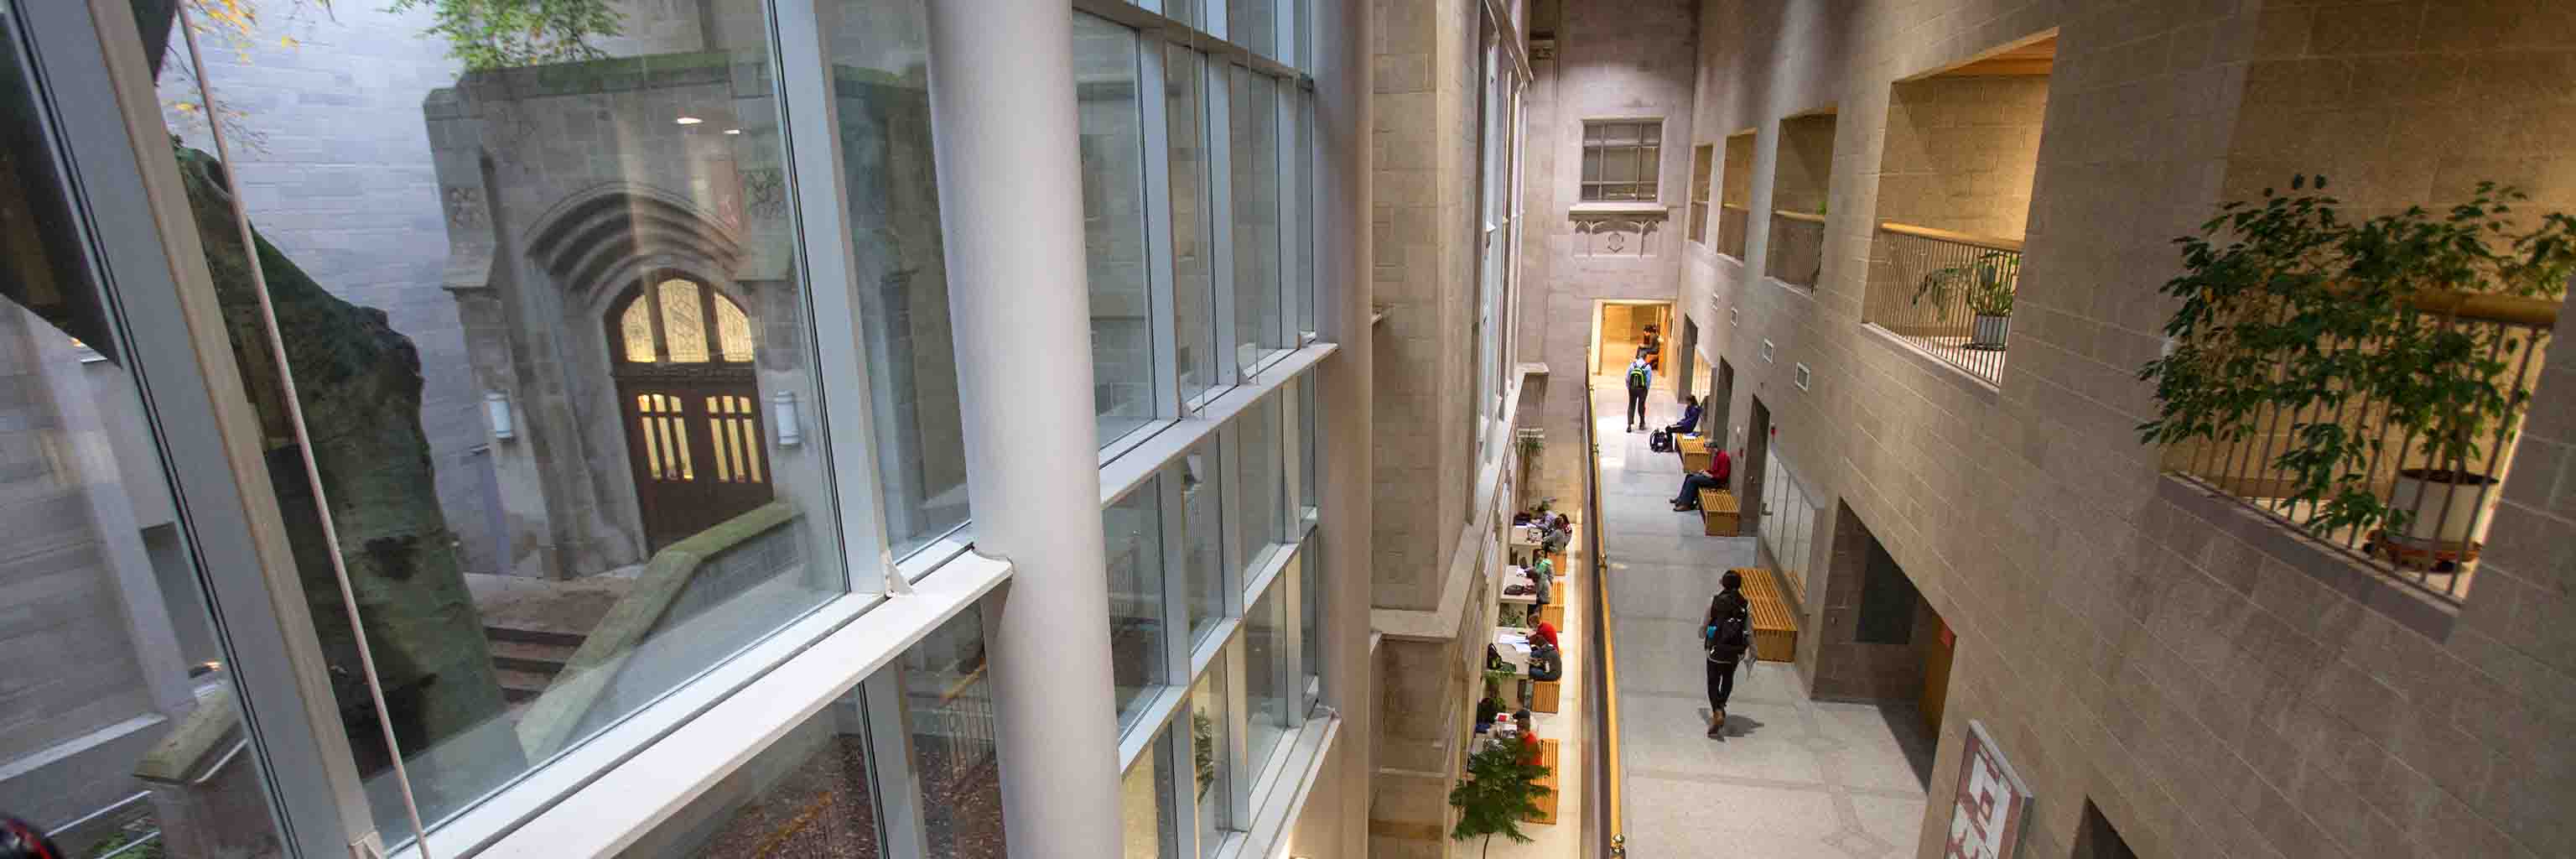 A hallway and courtyard in the Chemistry Building